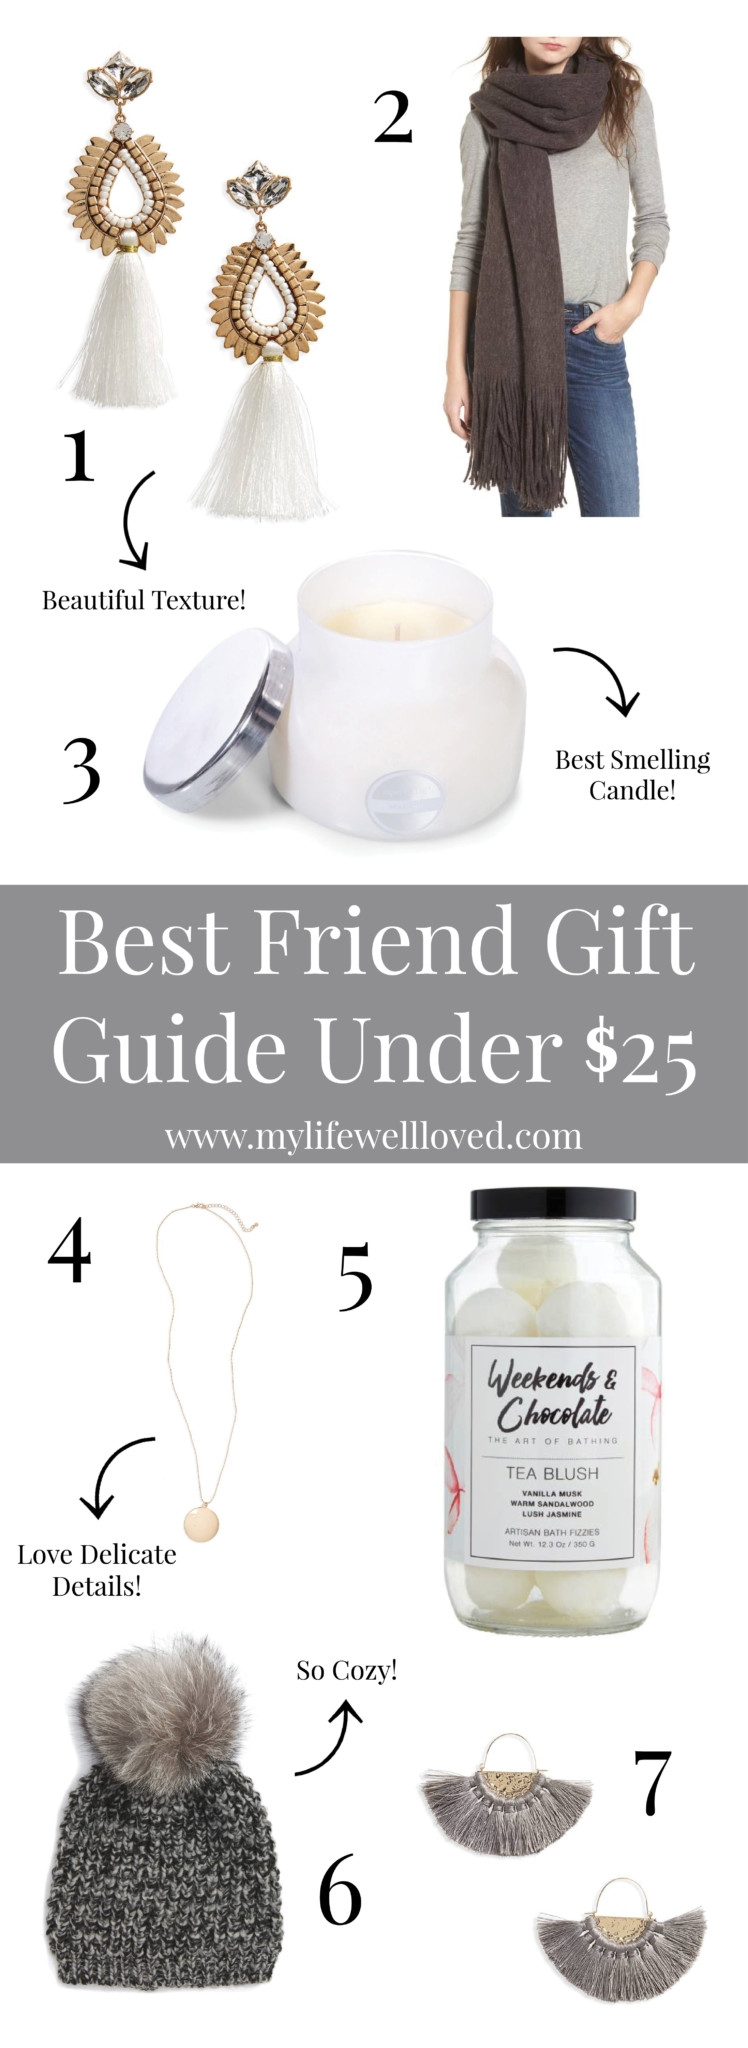 Best Friend Gifts Under $25 from Alabama blogger Heather Brown of MyLifeWellLoved.com // gifts for friends // friend gift idea // bestie gift guide // secret santa gift under $20